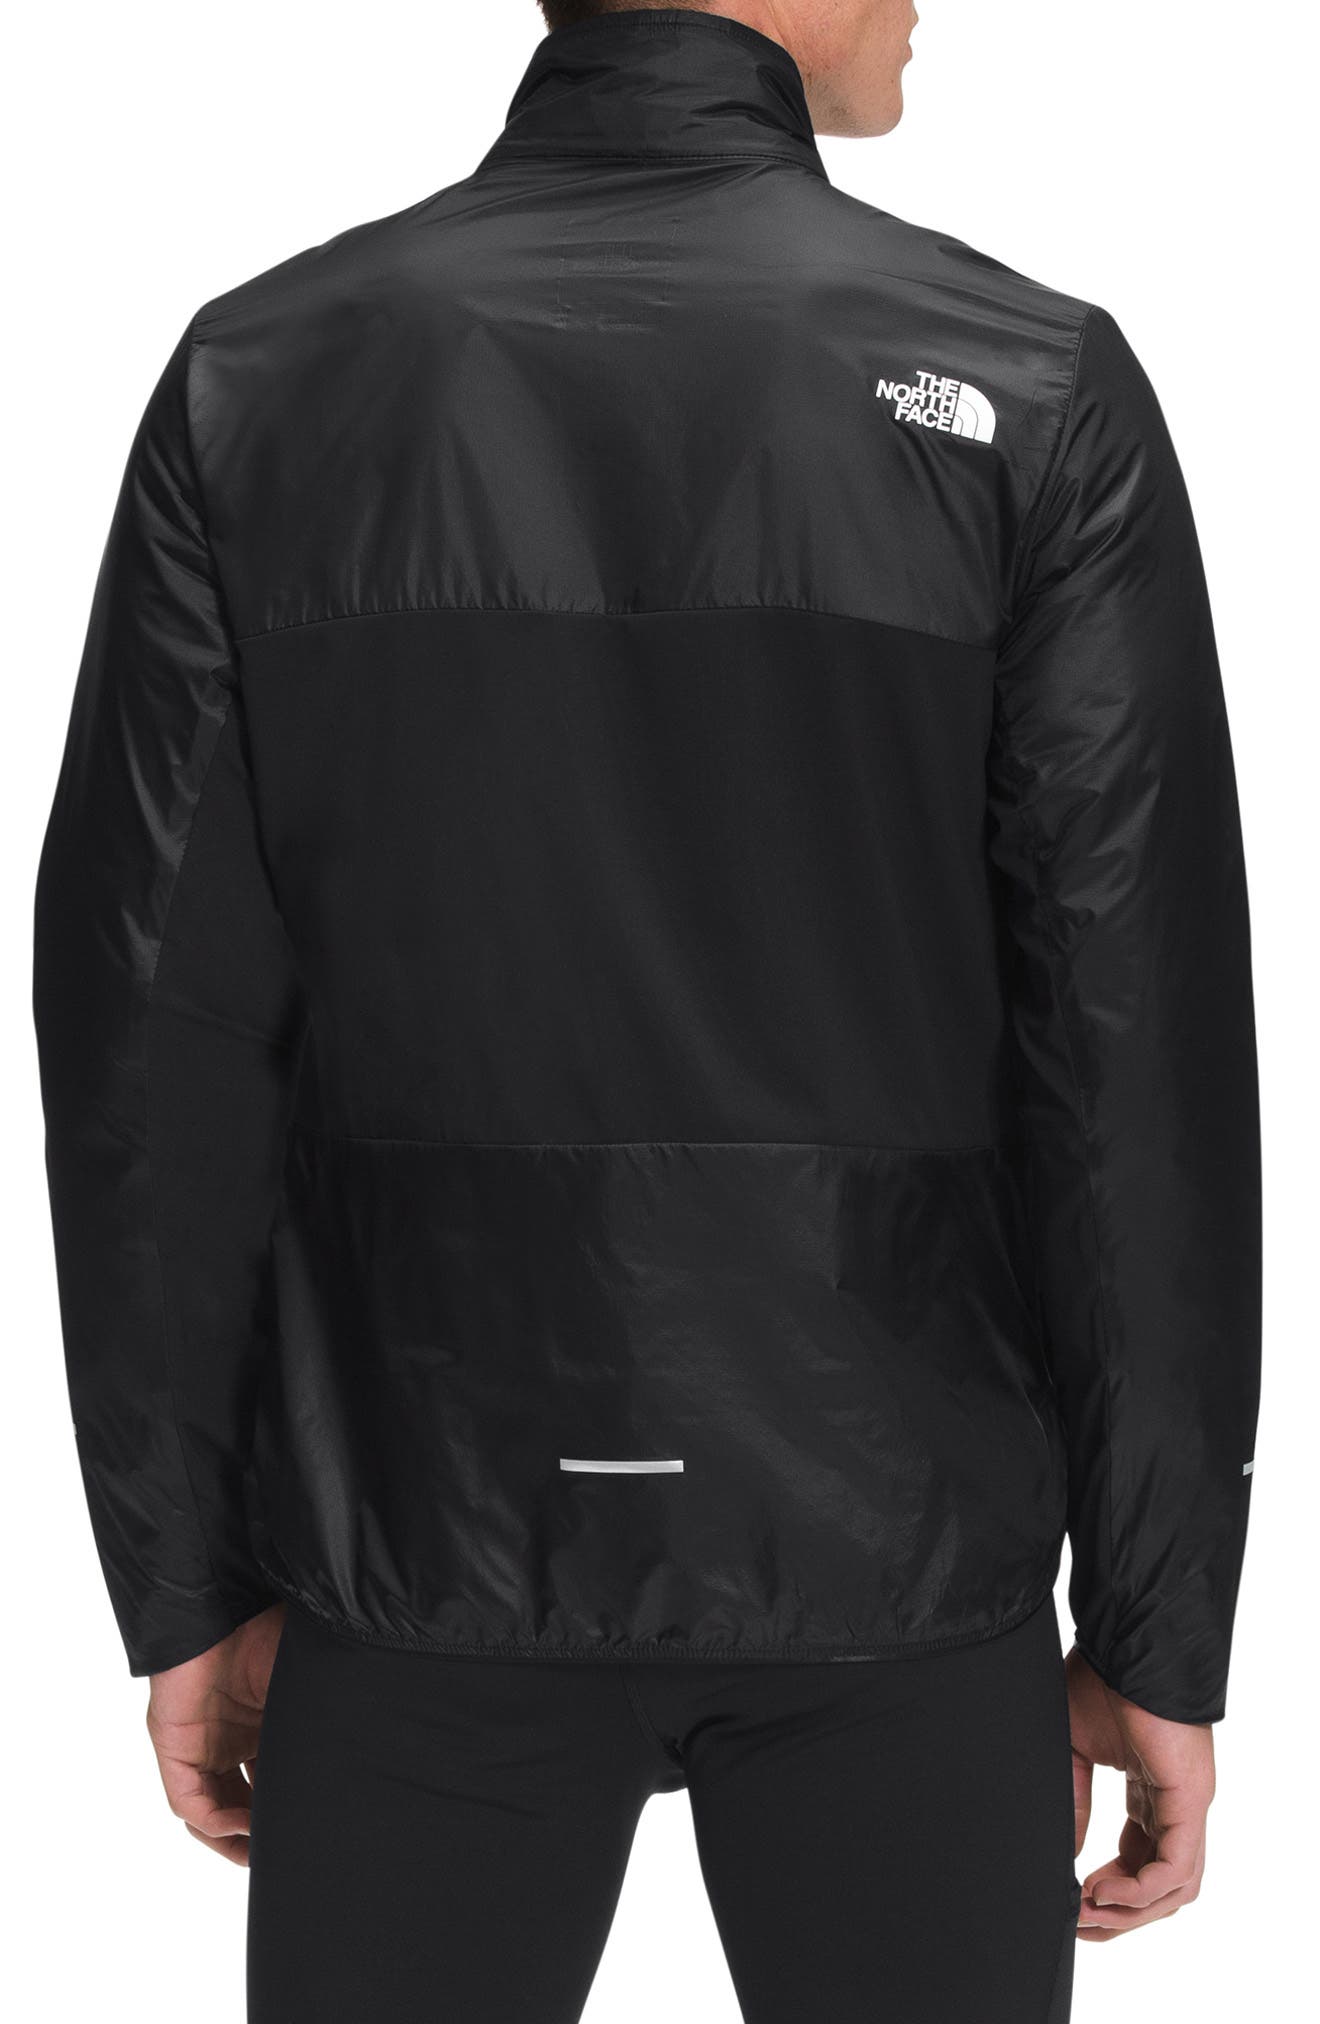 THE NORTH FACE Water Repellent Jacket, Alternate, color, BLACK